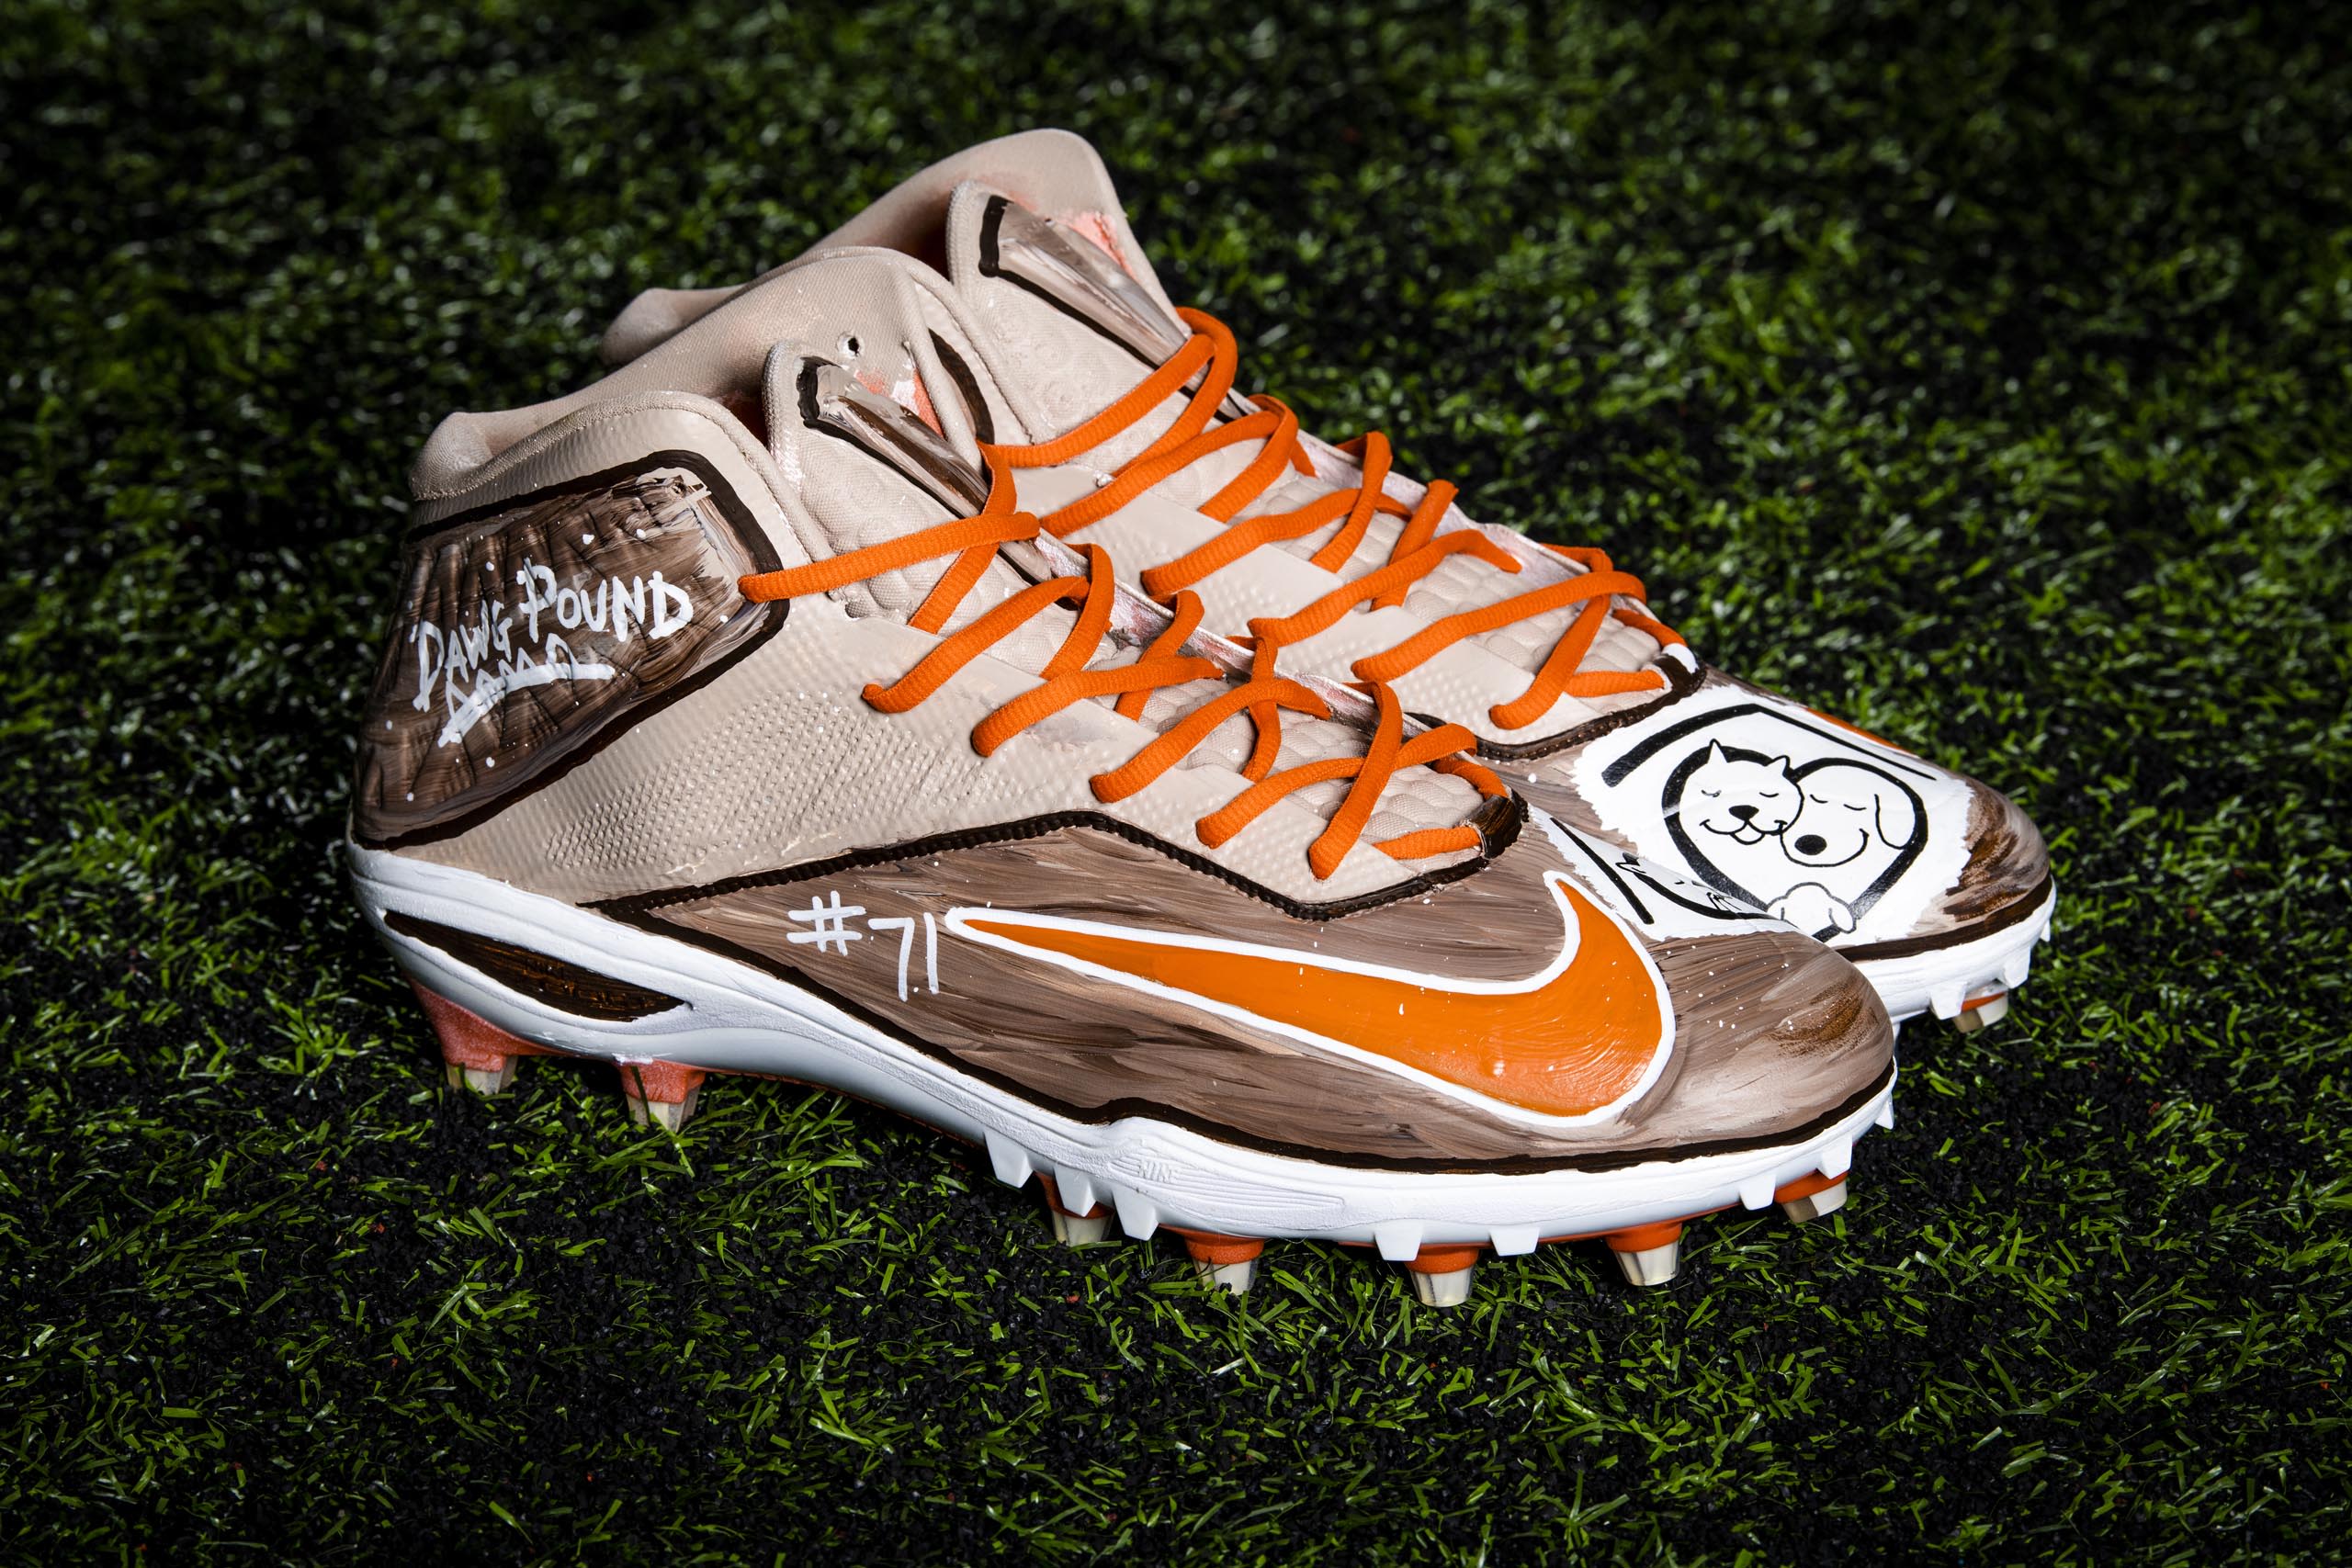 Cleveland Browns players charity cleats, December 12, 2021